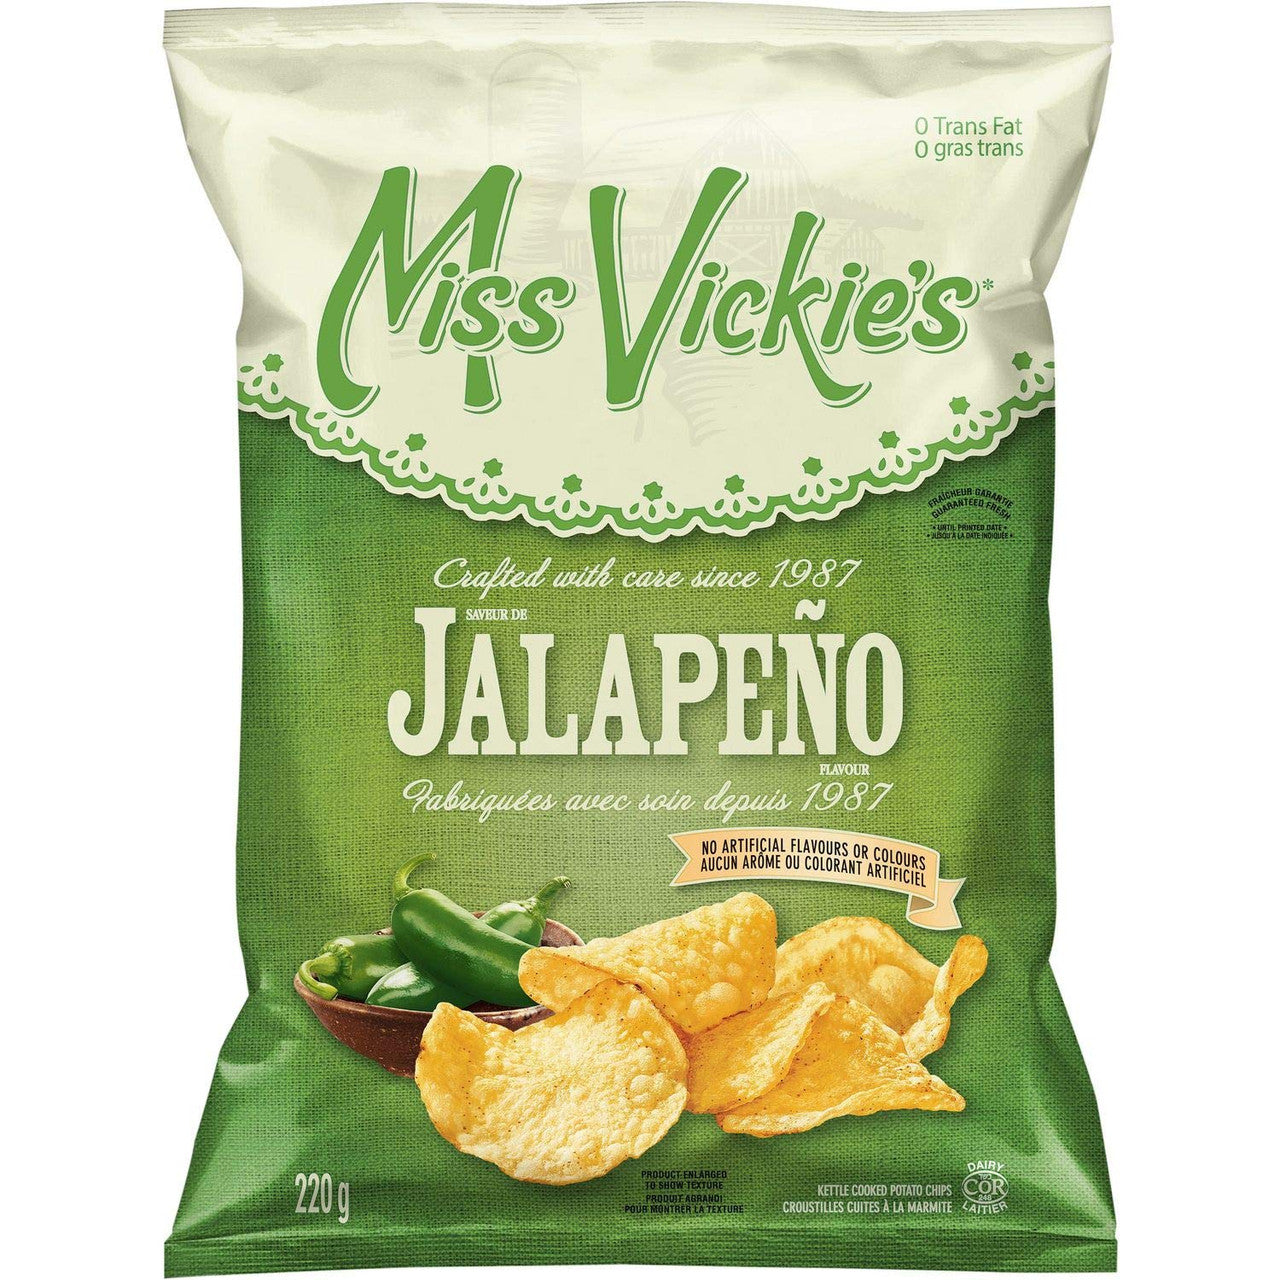 Miss Vickies Jalapeno Kettle Cooked Potato Chips 220g/7.8oz. (3-Pack){Imported from Canada}